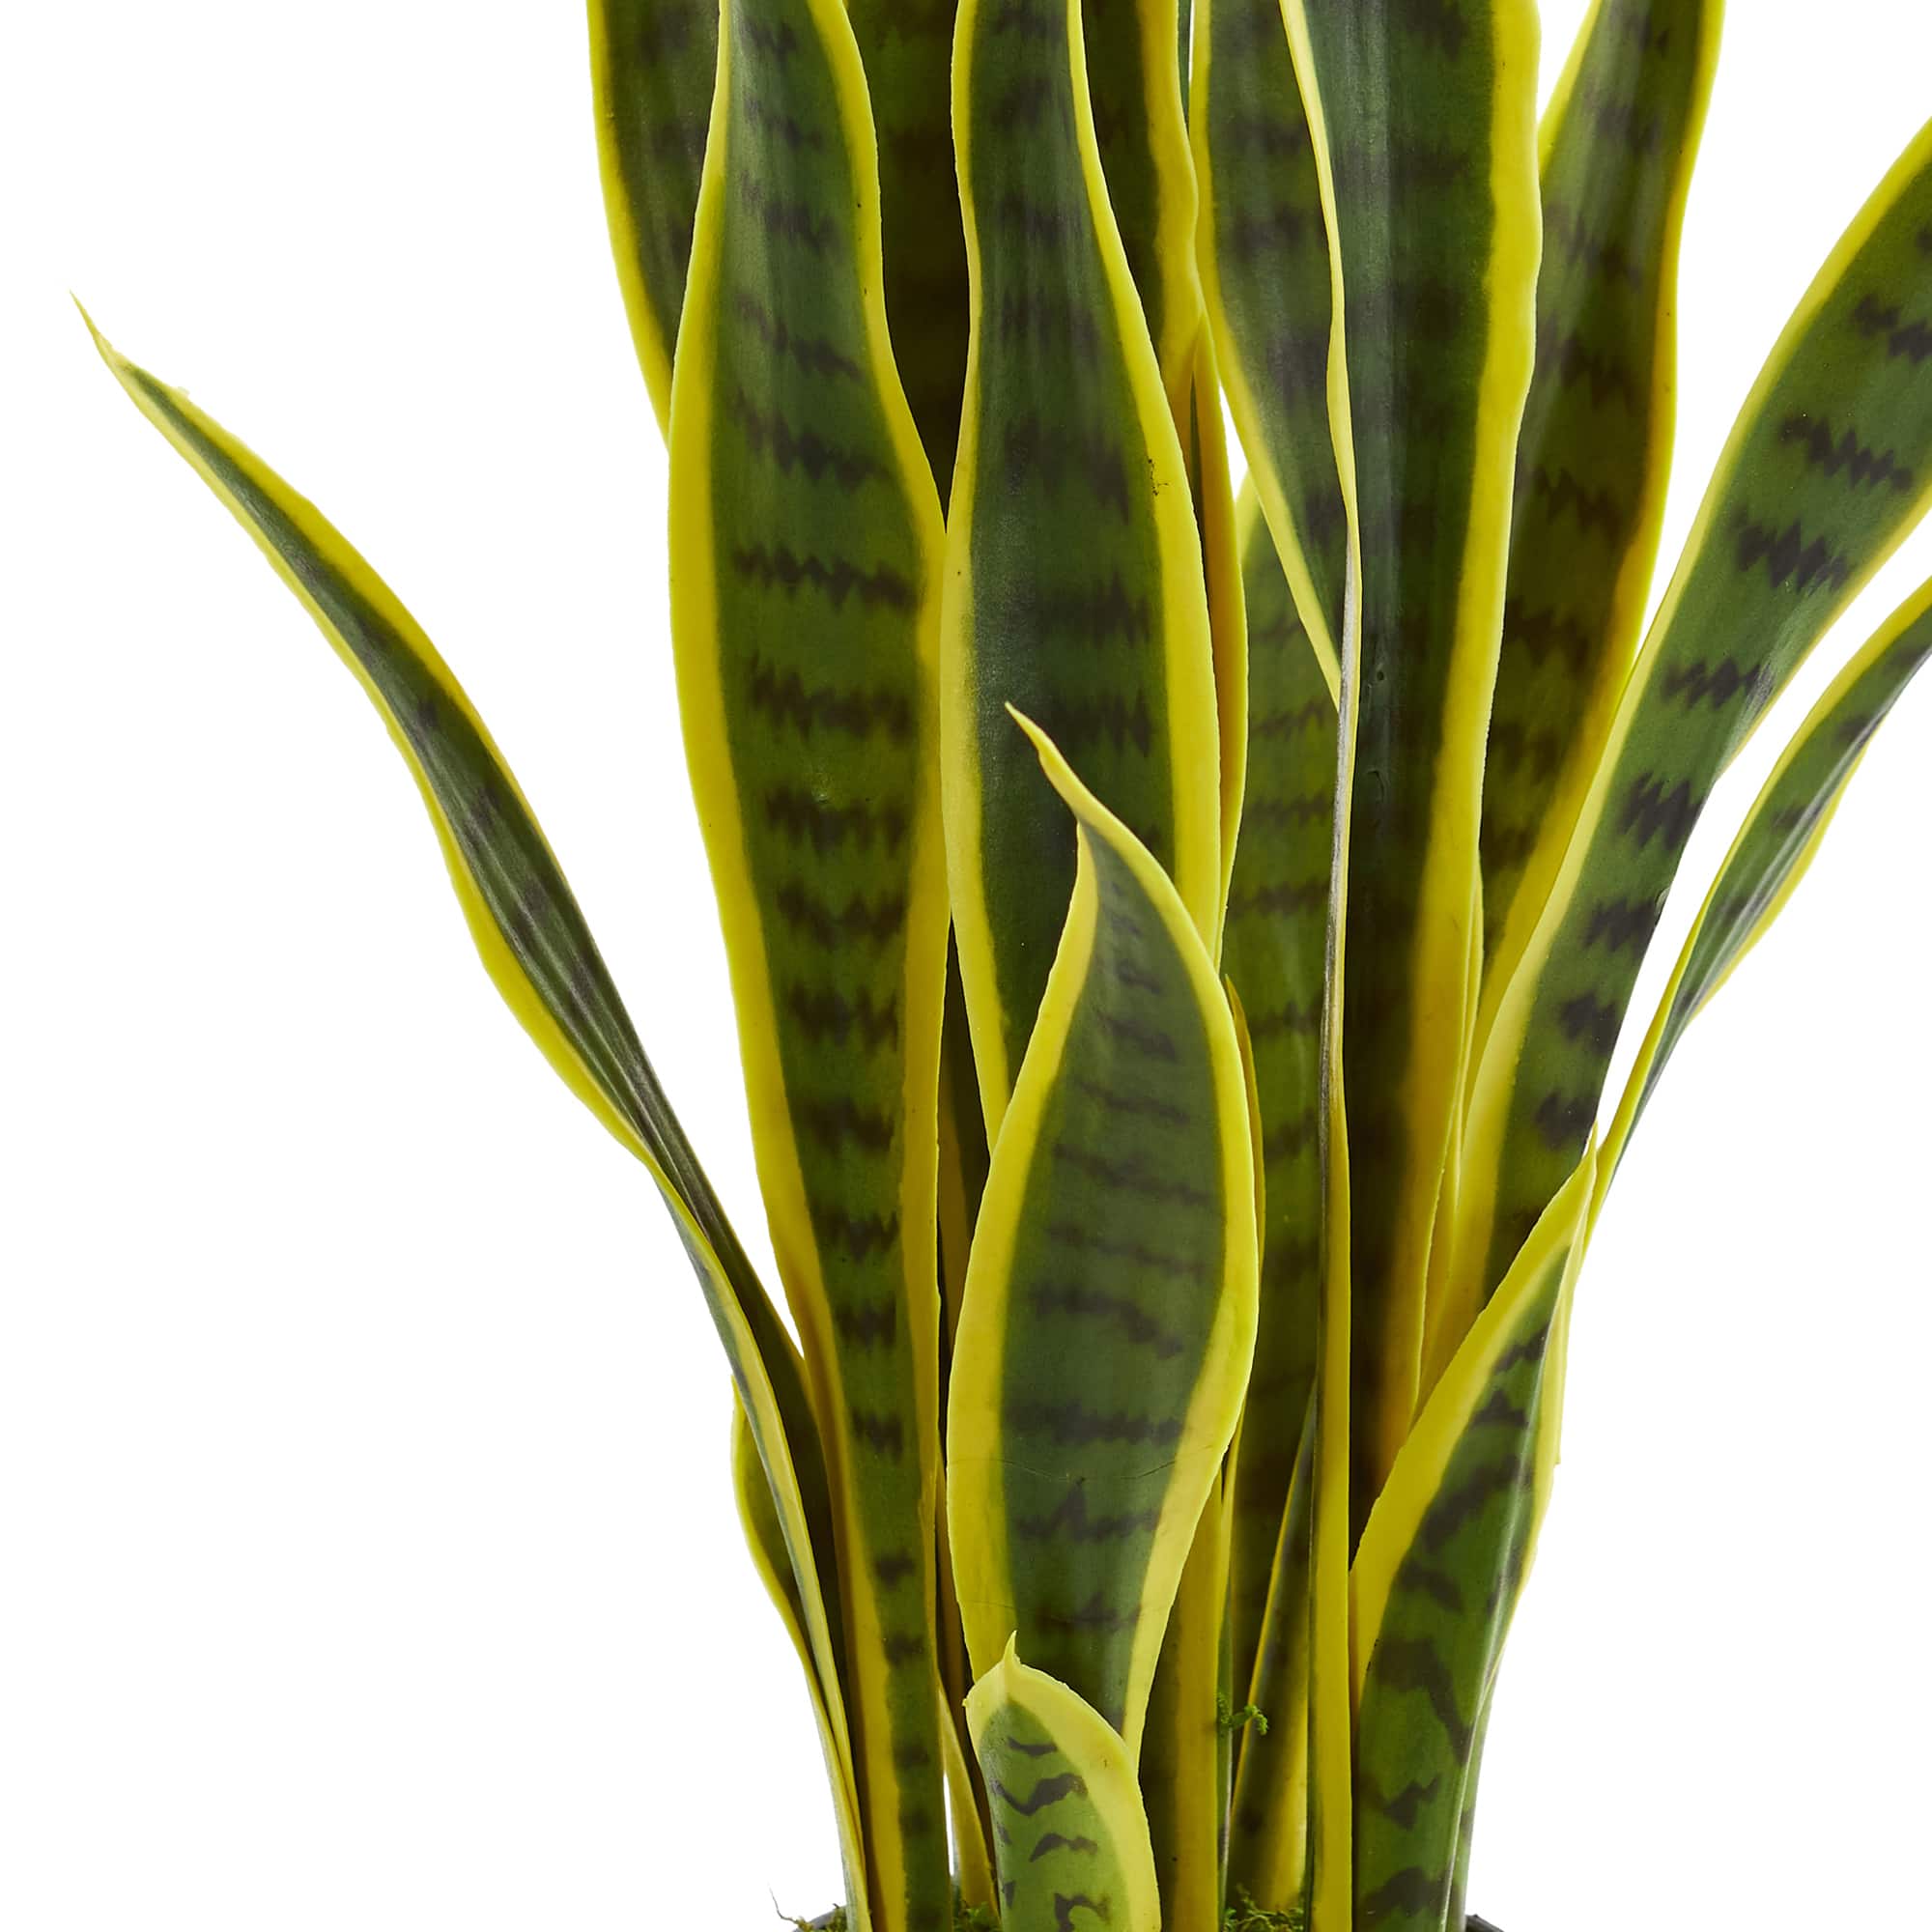 26in. Potted Sansevieria Plant